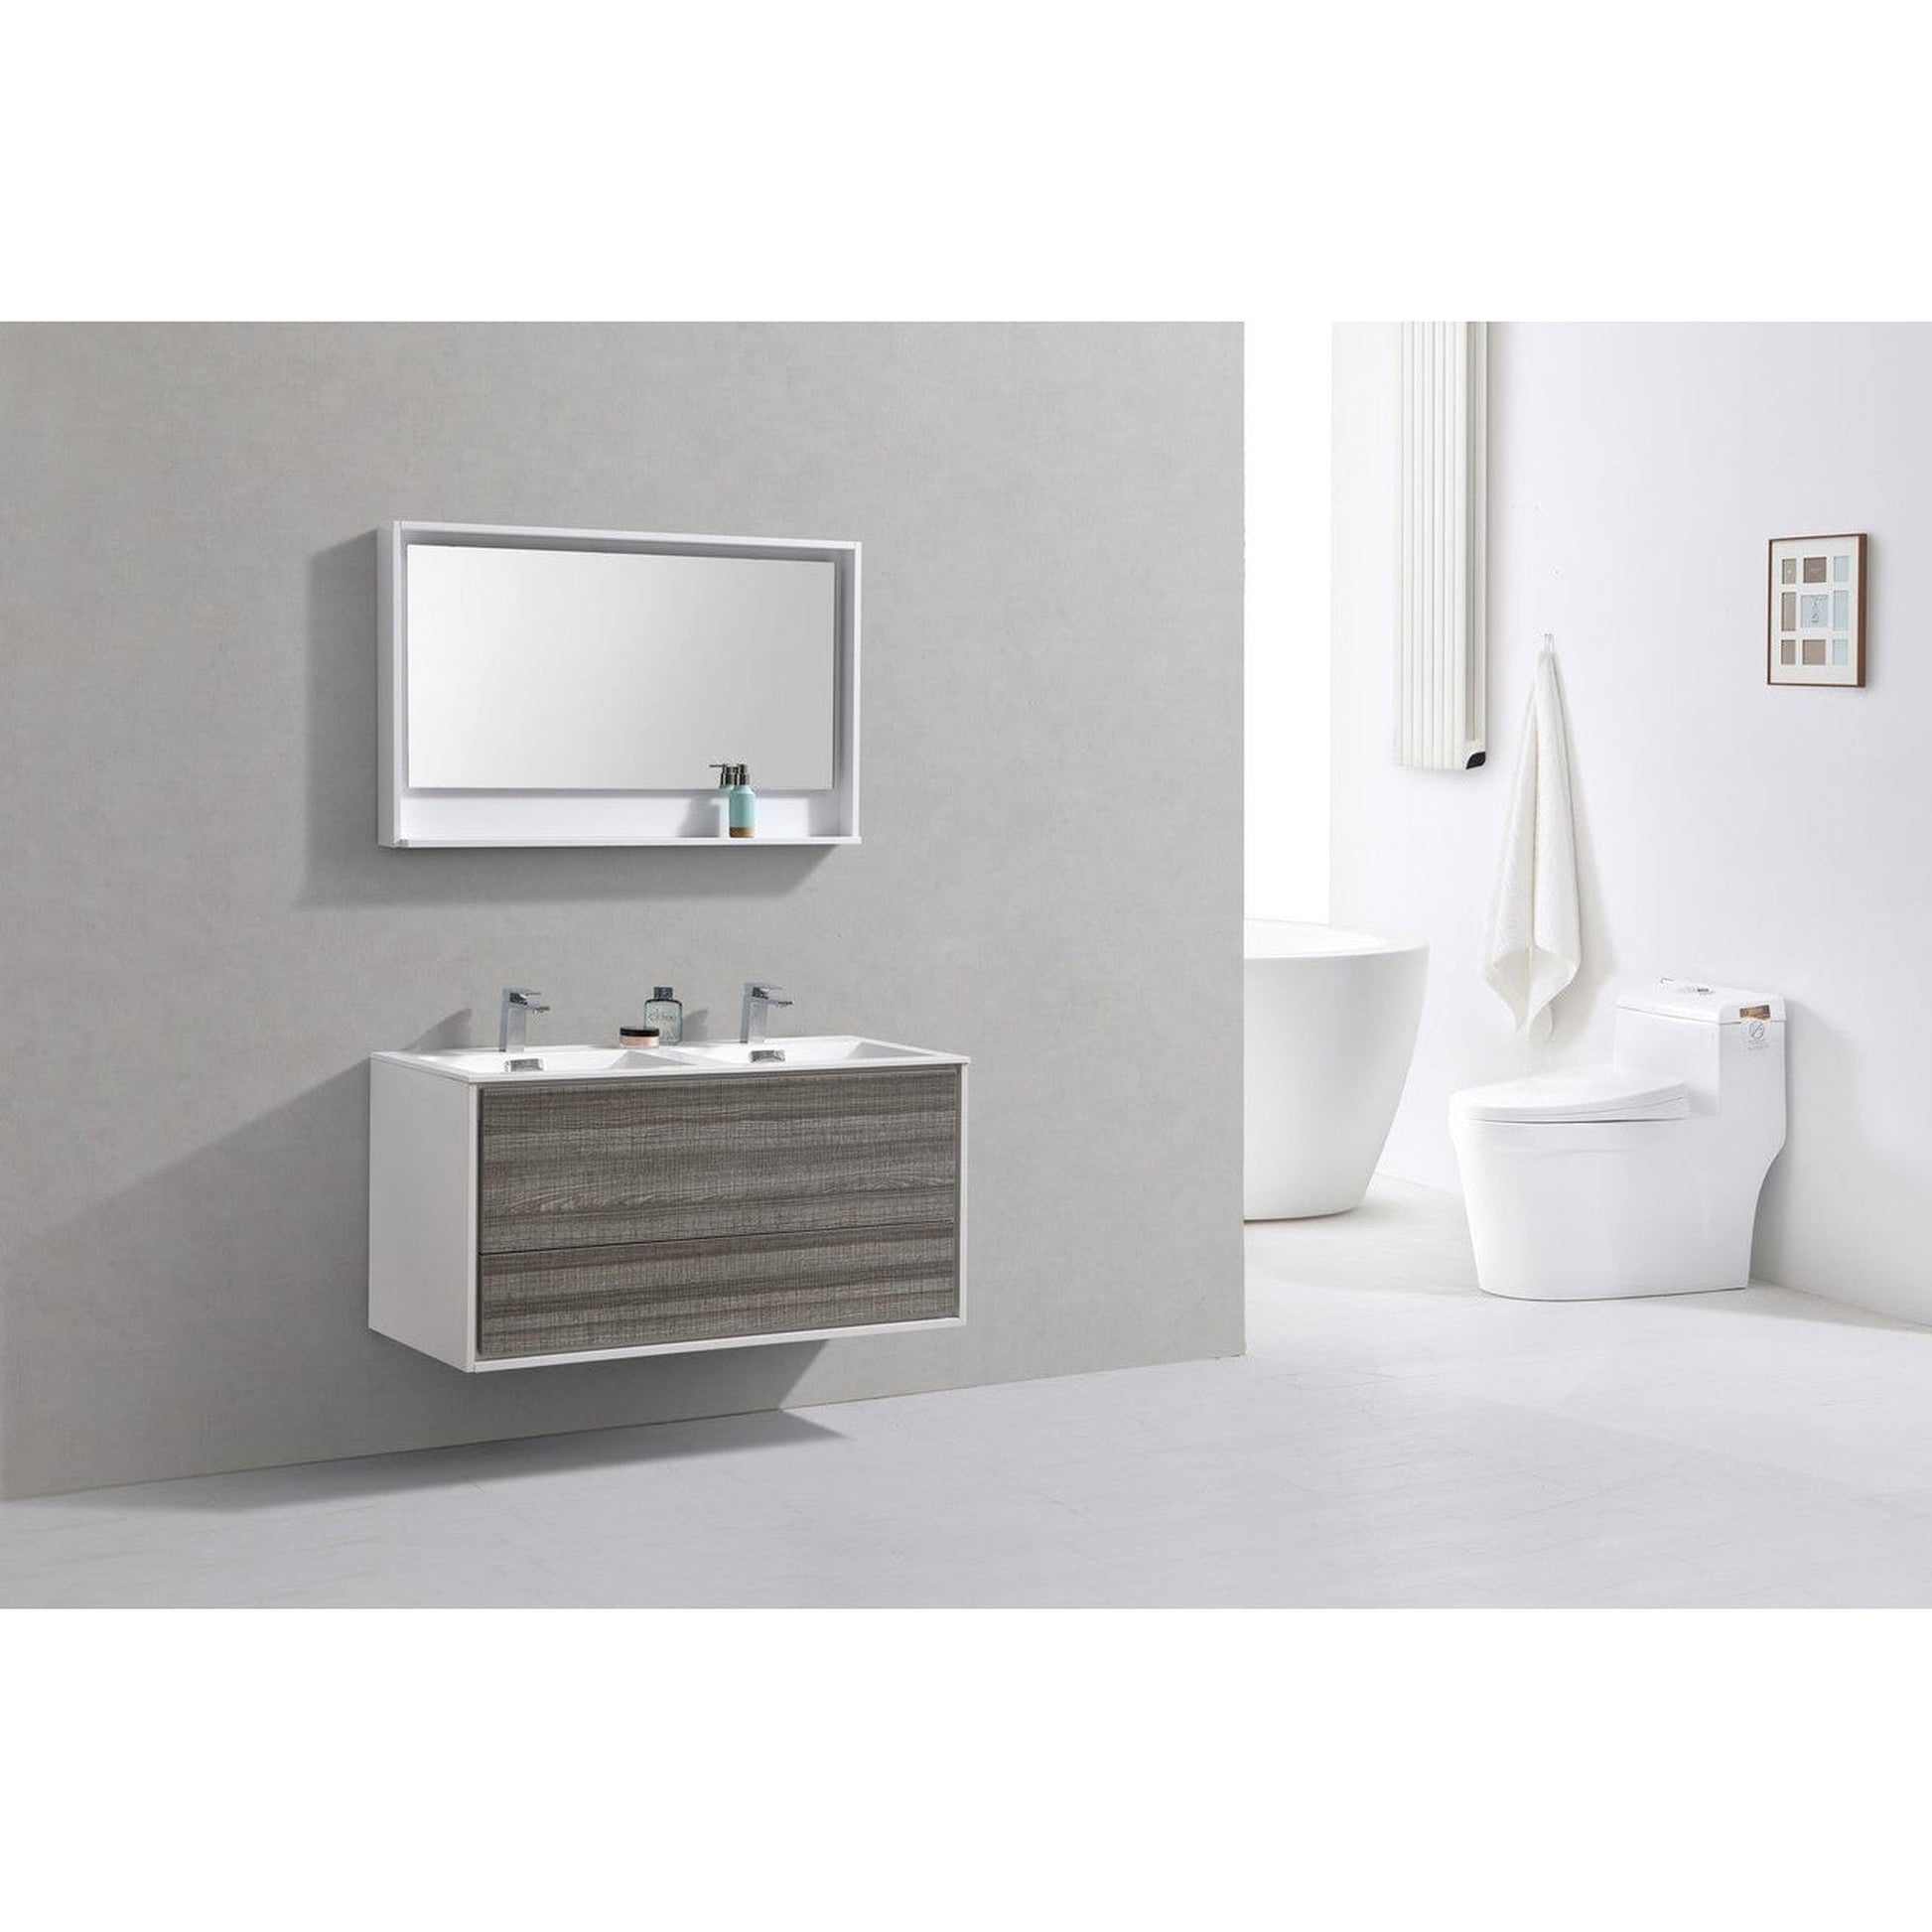 KubeBath DeLusso 48" Ash Gray Wall-Mounted Modern Bathroom Vanity With Double Integrated Acrylic Sink With Overflow and 48" White Framed Mirror With Shelf